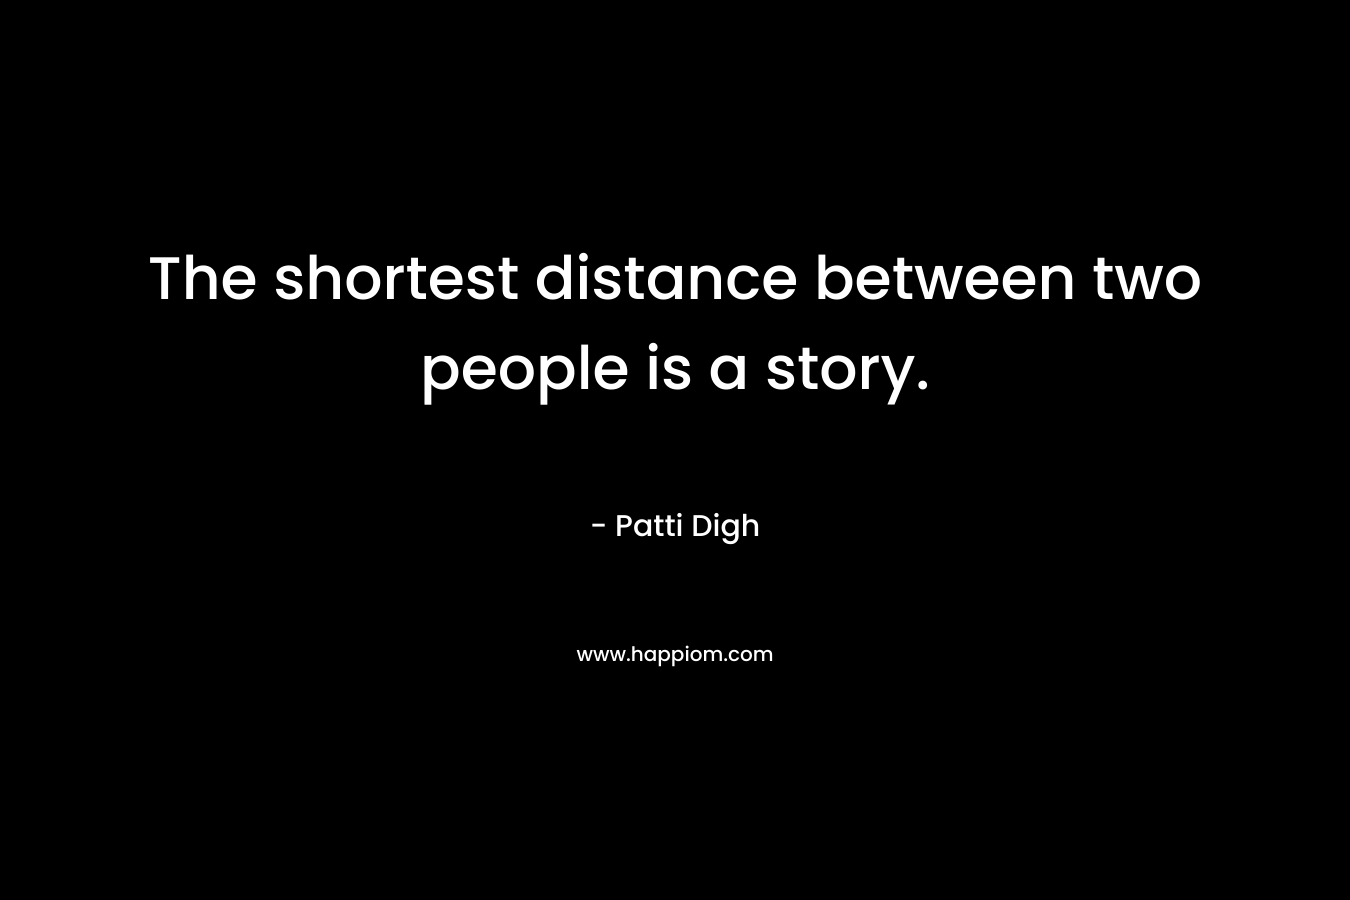 The shortest distance between two people is a story.